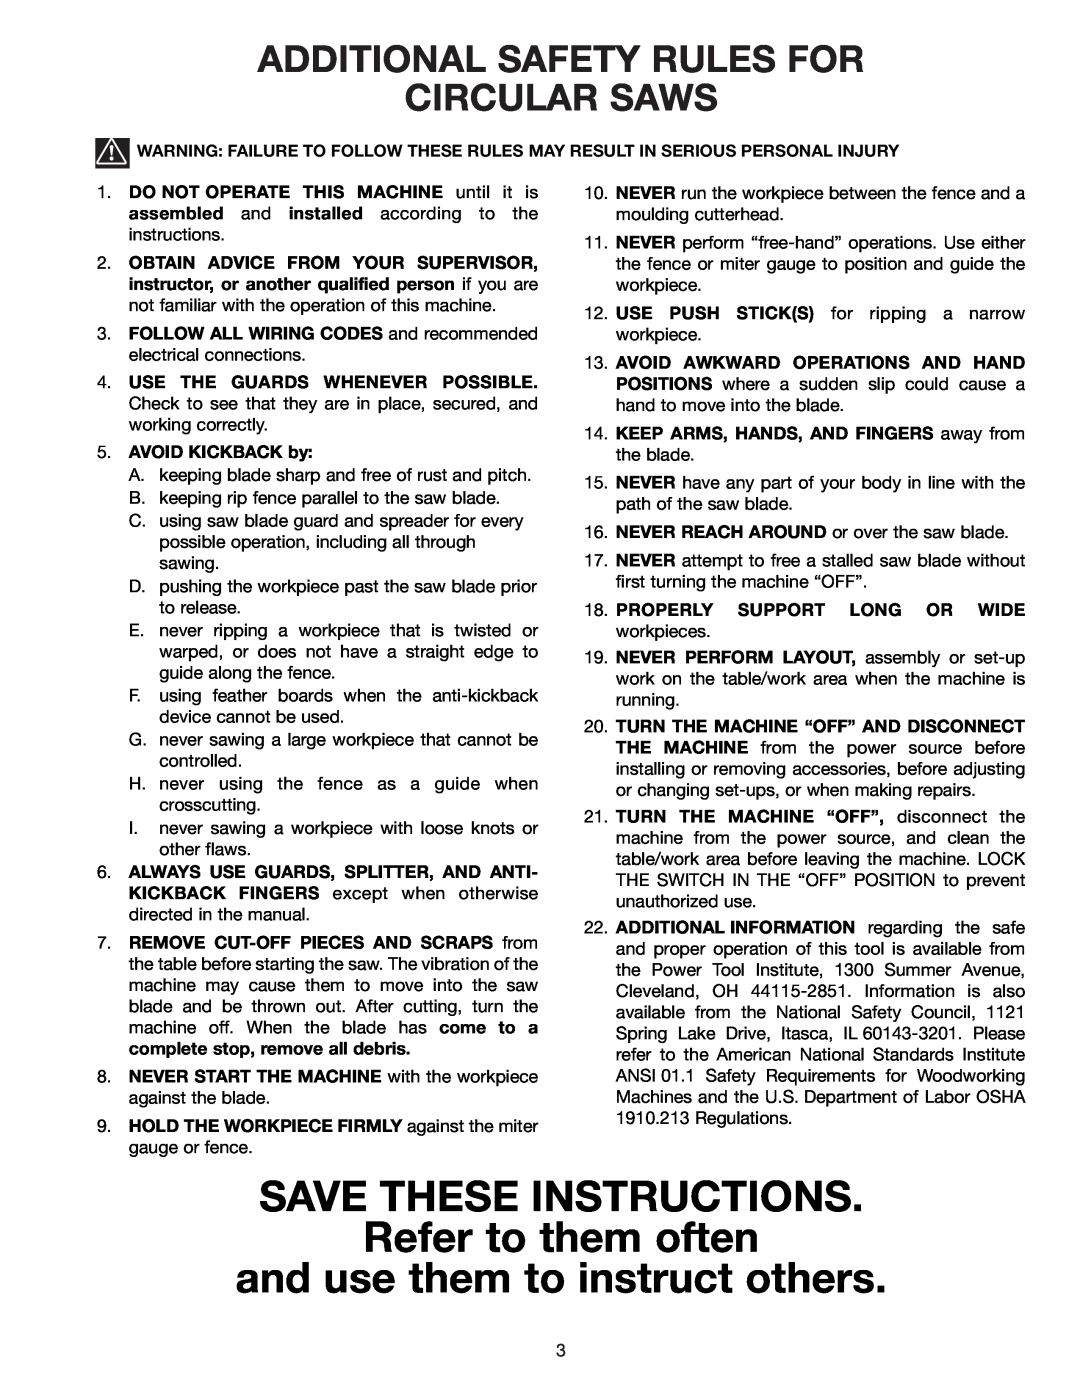 Delta 34-801, 36-812 SAVE THESE INSTRUCTIONS Refer to them often, and use them to instruct others, AVOID KICKBACK by 